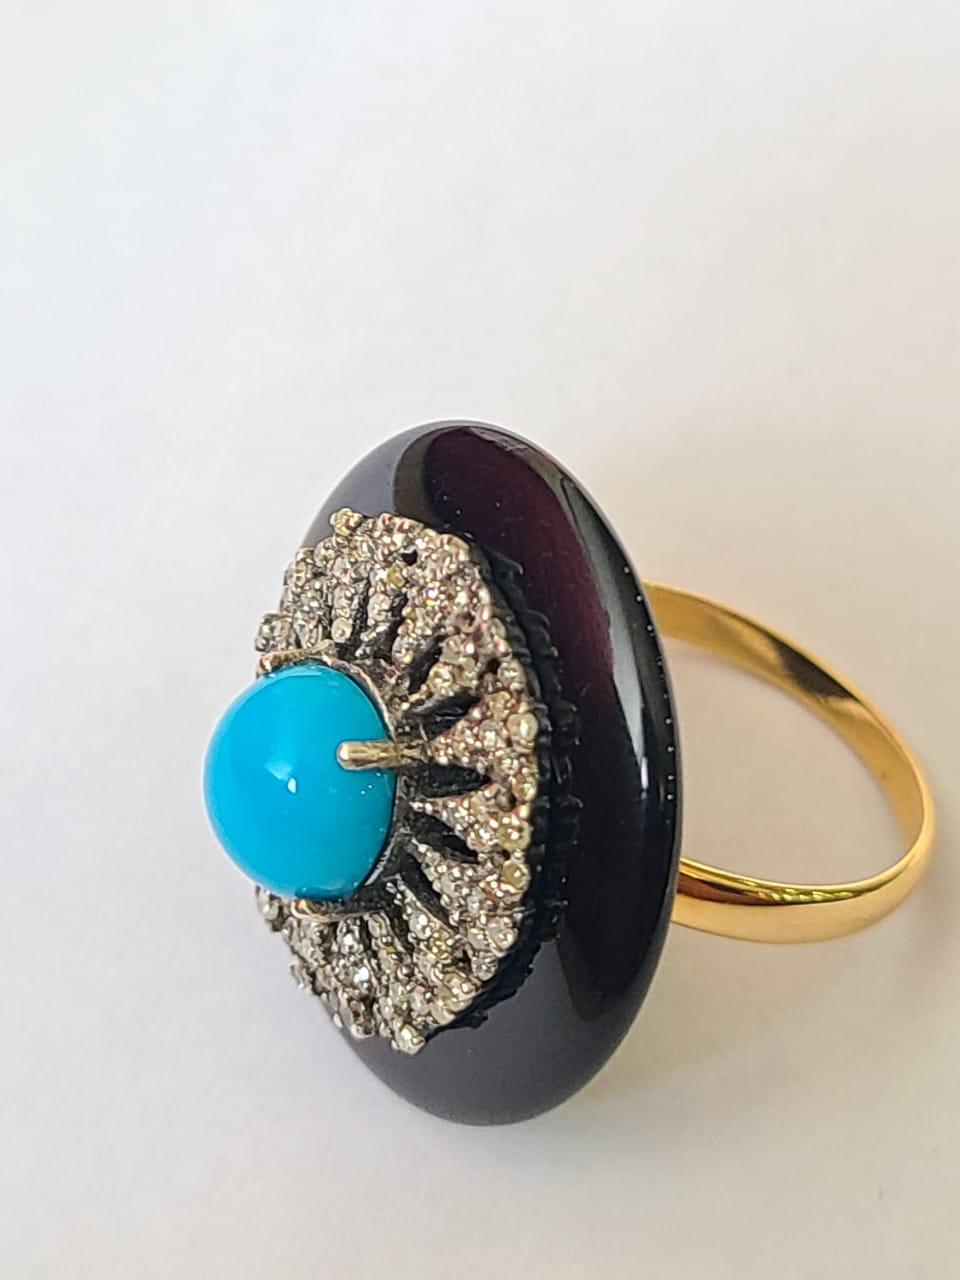 A very beautiful Turquoise, Onyx & Diamonds Art Deco style, Victorian Cocktail/ Dome Ring set in 14K Gold & Silver 925. The weight of the Turquoise is 1.14 carats. The weight of Black Onyx is 17.32 carats. The weight of the Diamonds is 0.54 carats.